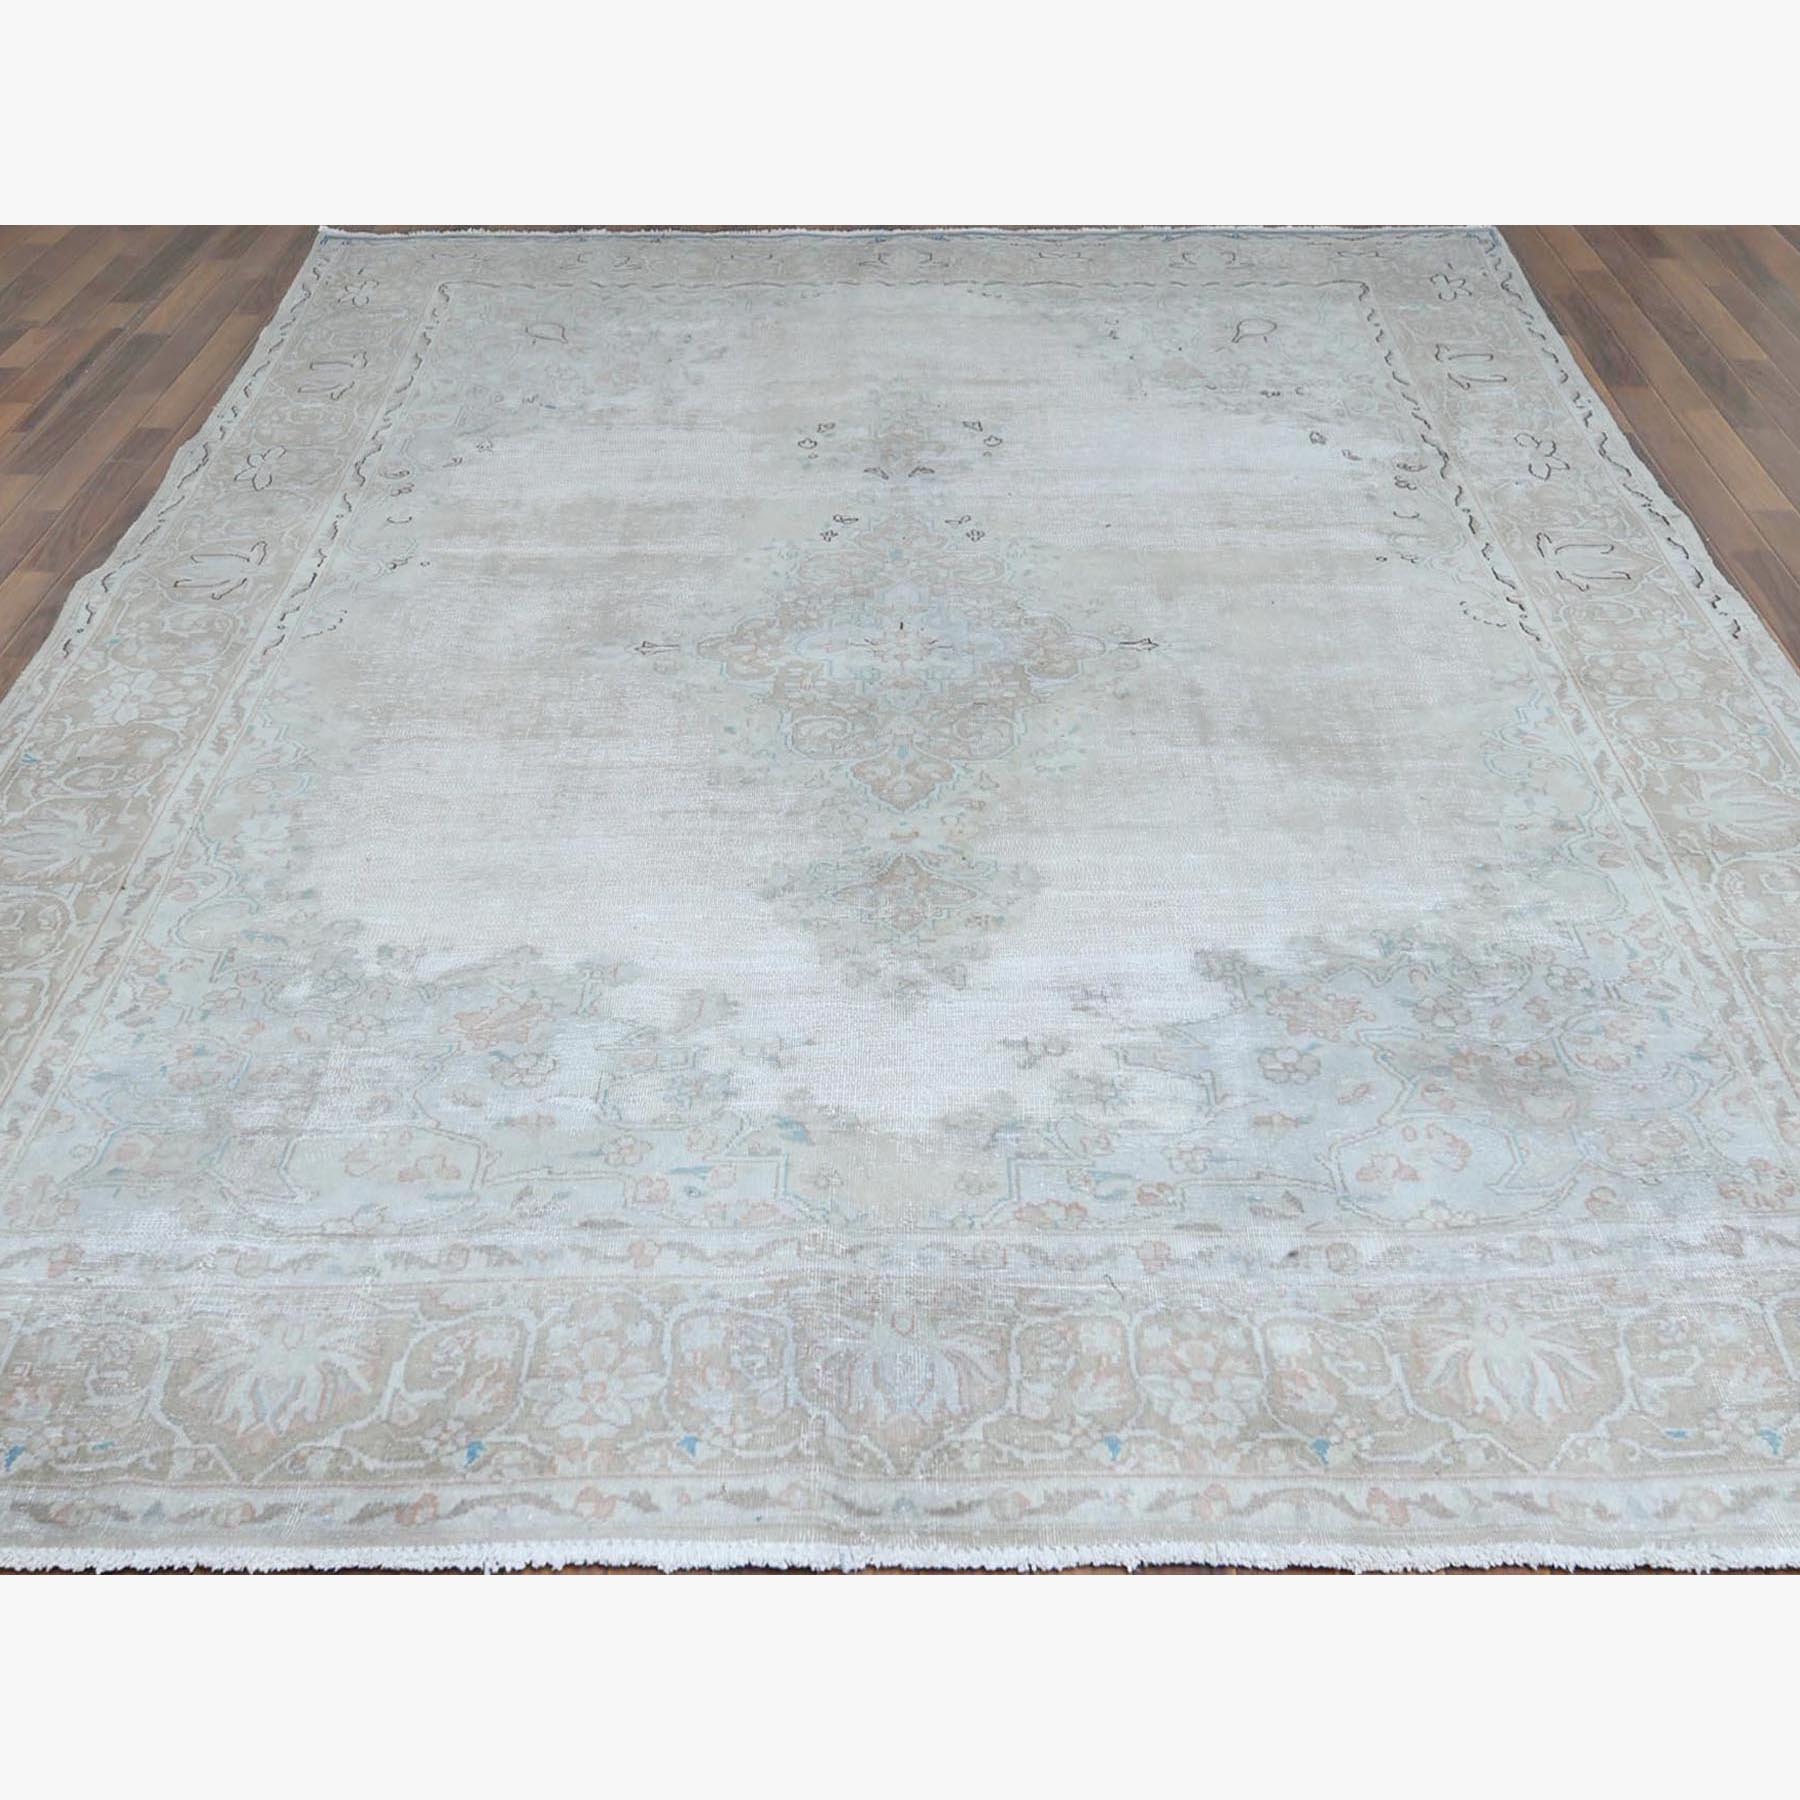 9'x10'5" Hand Woven Persian Kerman Vintage Clean Pure Wool Sheared Low Beige Washed Out Oriental Rug 